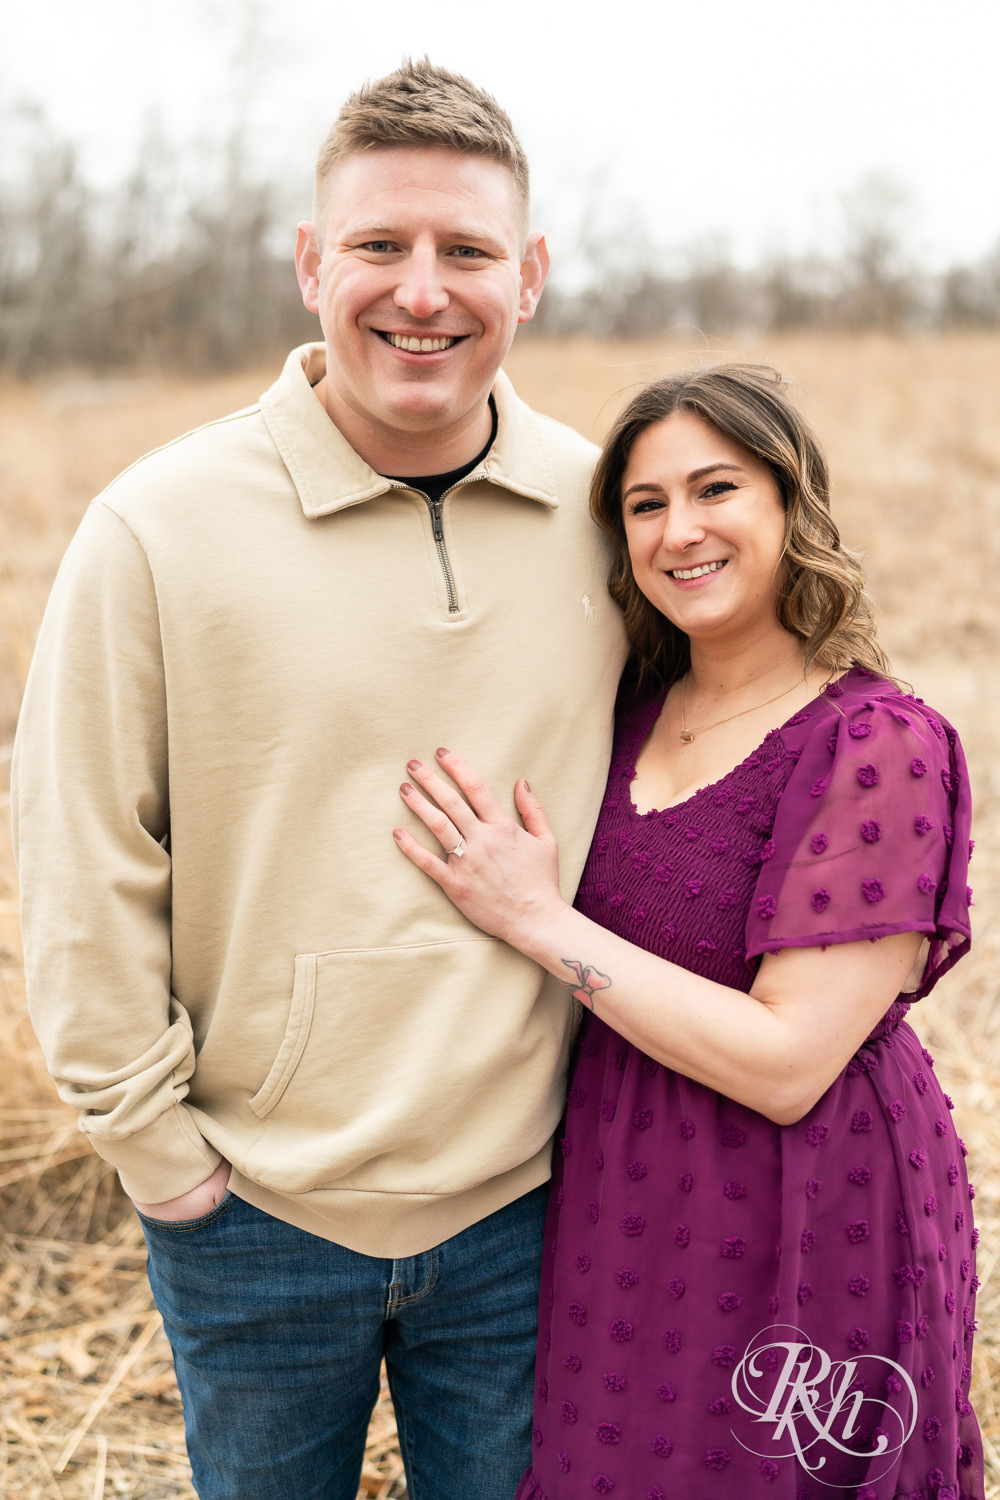 Man in jeans and woman in magenta dress smile during March engagement photography in Eagan, Minnesota.